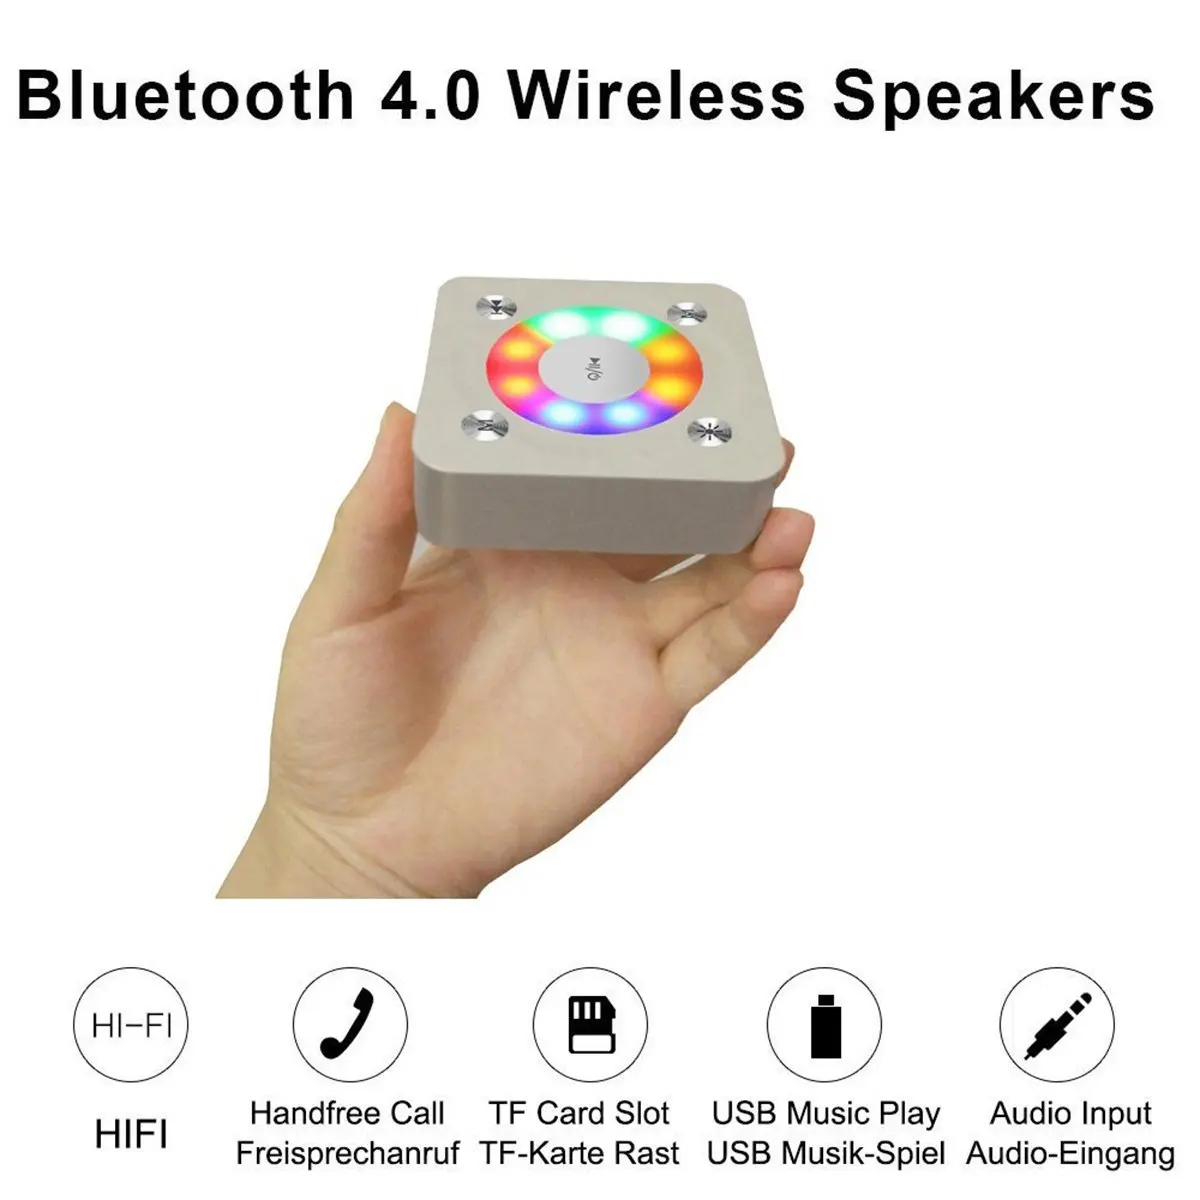 Portable Wireless Bluetooth small Speakers mini size outdoor Travel Stereo Music Loudest Sound for laptop PC and mobile A9